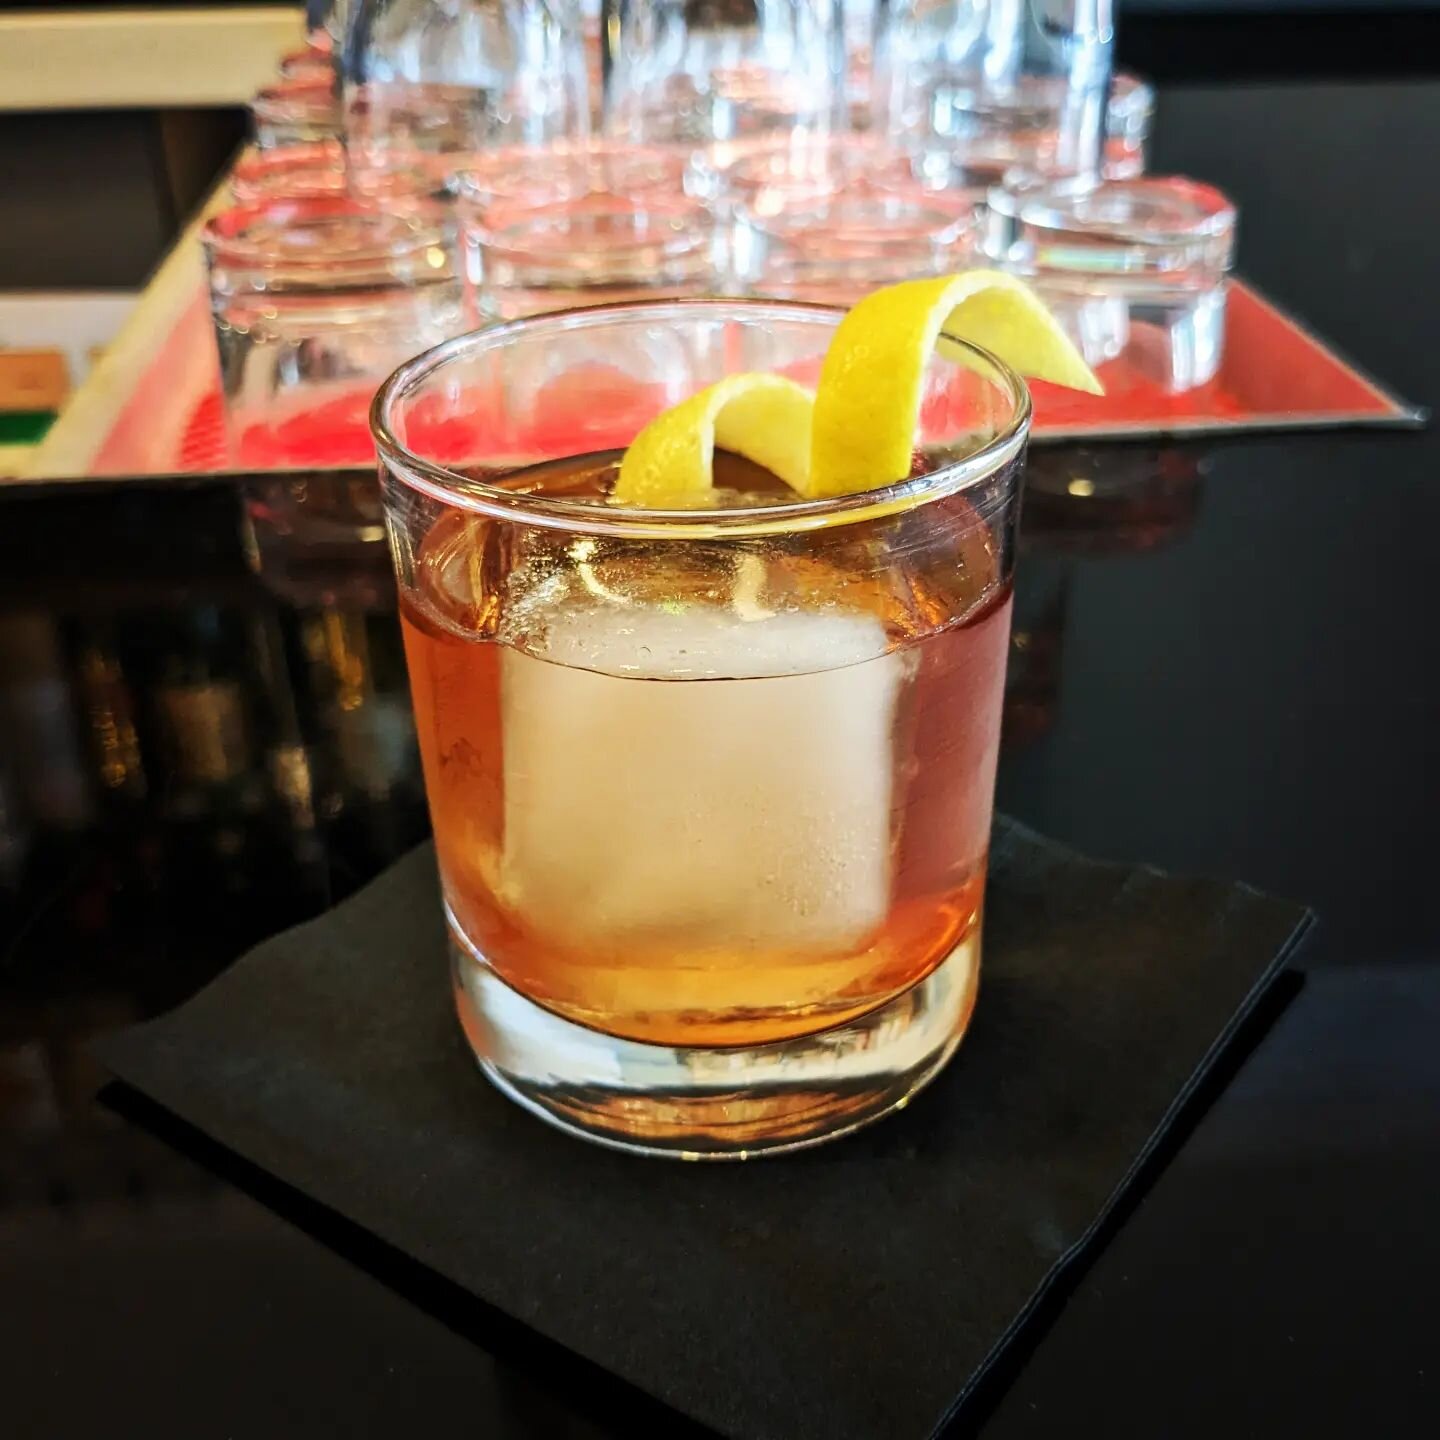 $10 Tuesday at The Dime! This afternoon we present &quot;Fair Weather Friend,&quot; a robust mix of Compass Box Glasgow Blend Scotch, Yellow Chartreuse, Bruto Americano, and Carpano Dry Vermouth. Bitter, smokey, and herbaceous.